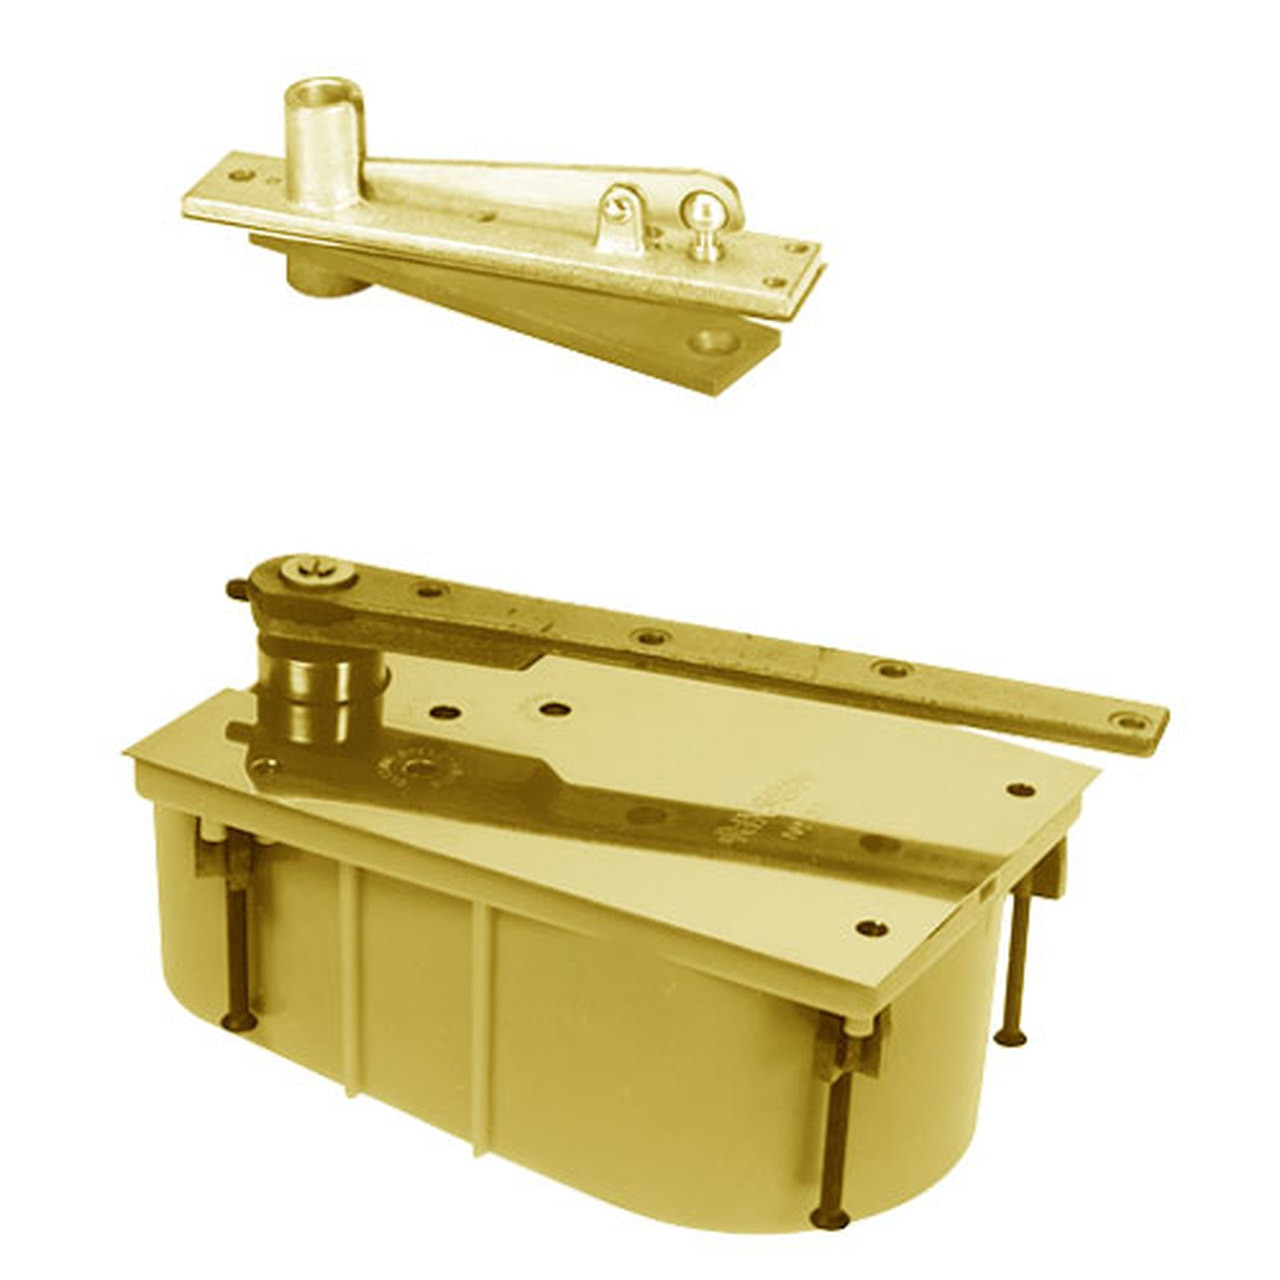 28-90N-554-LFP-LCC-RH-605 Rixson 28 Series Heavy Duty Single Acting Center Hung Floor Closer with Concealed Arm in Bright Brass Finish